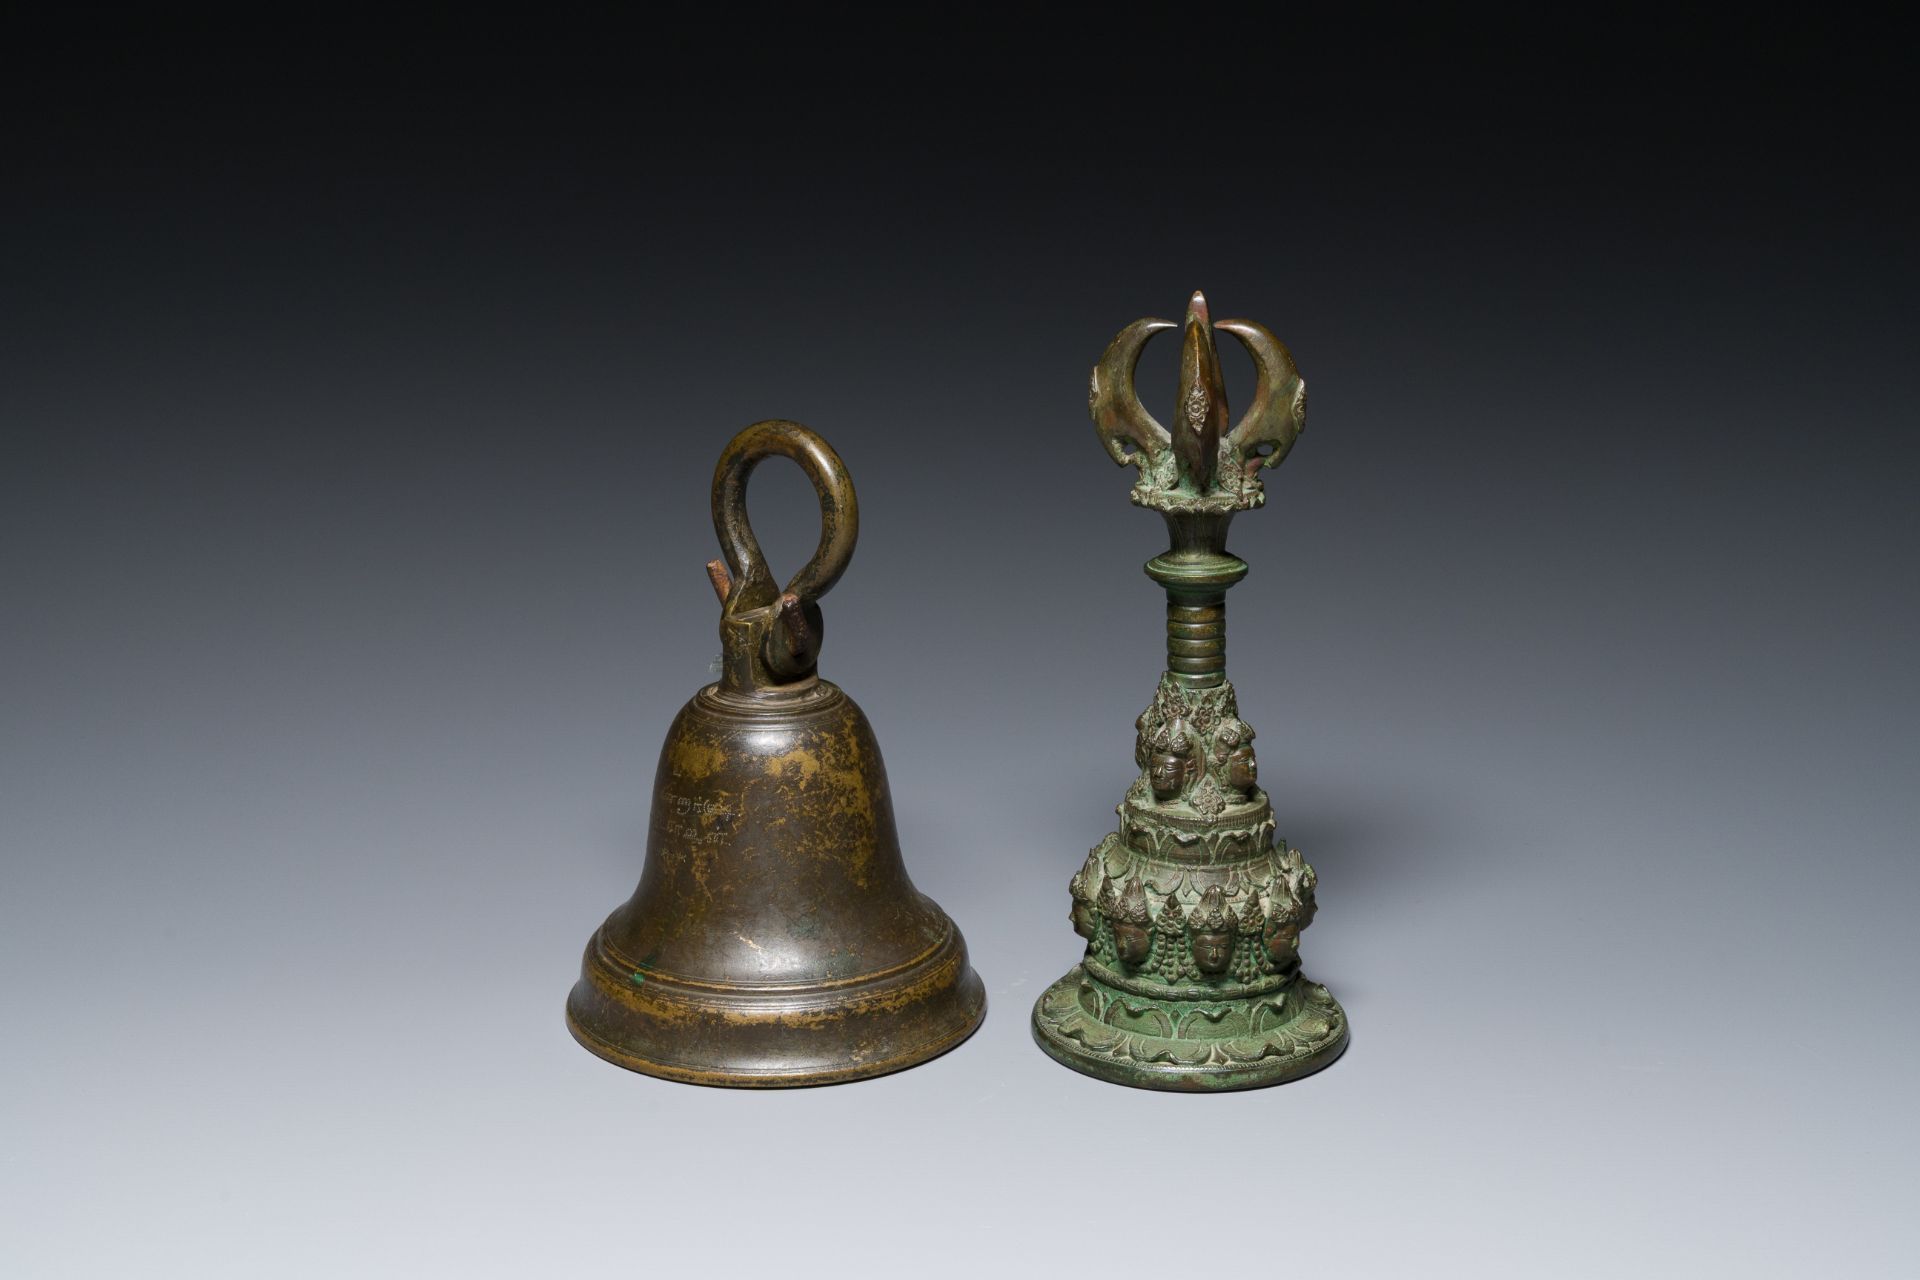 A bronze bell and a ceremonial hand bell, South Asia and Southeast Asia, 19th C. or earlier - Bild 3 aus 21